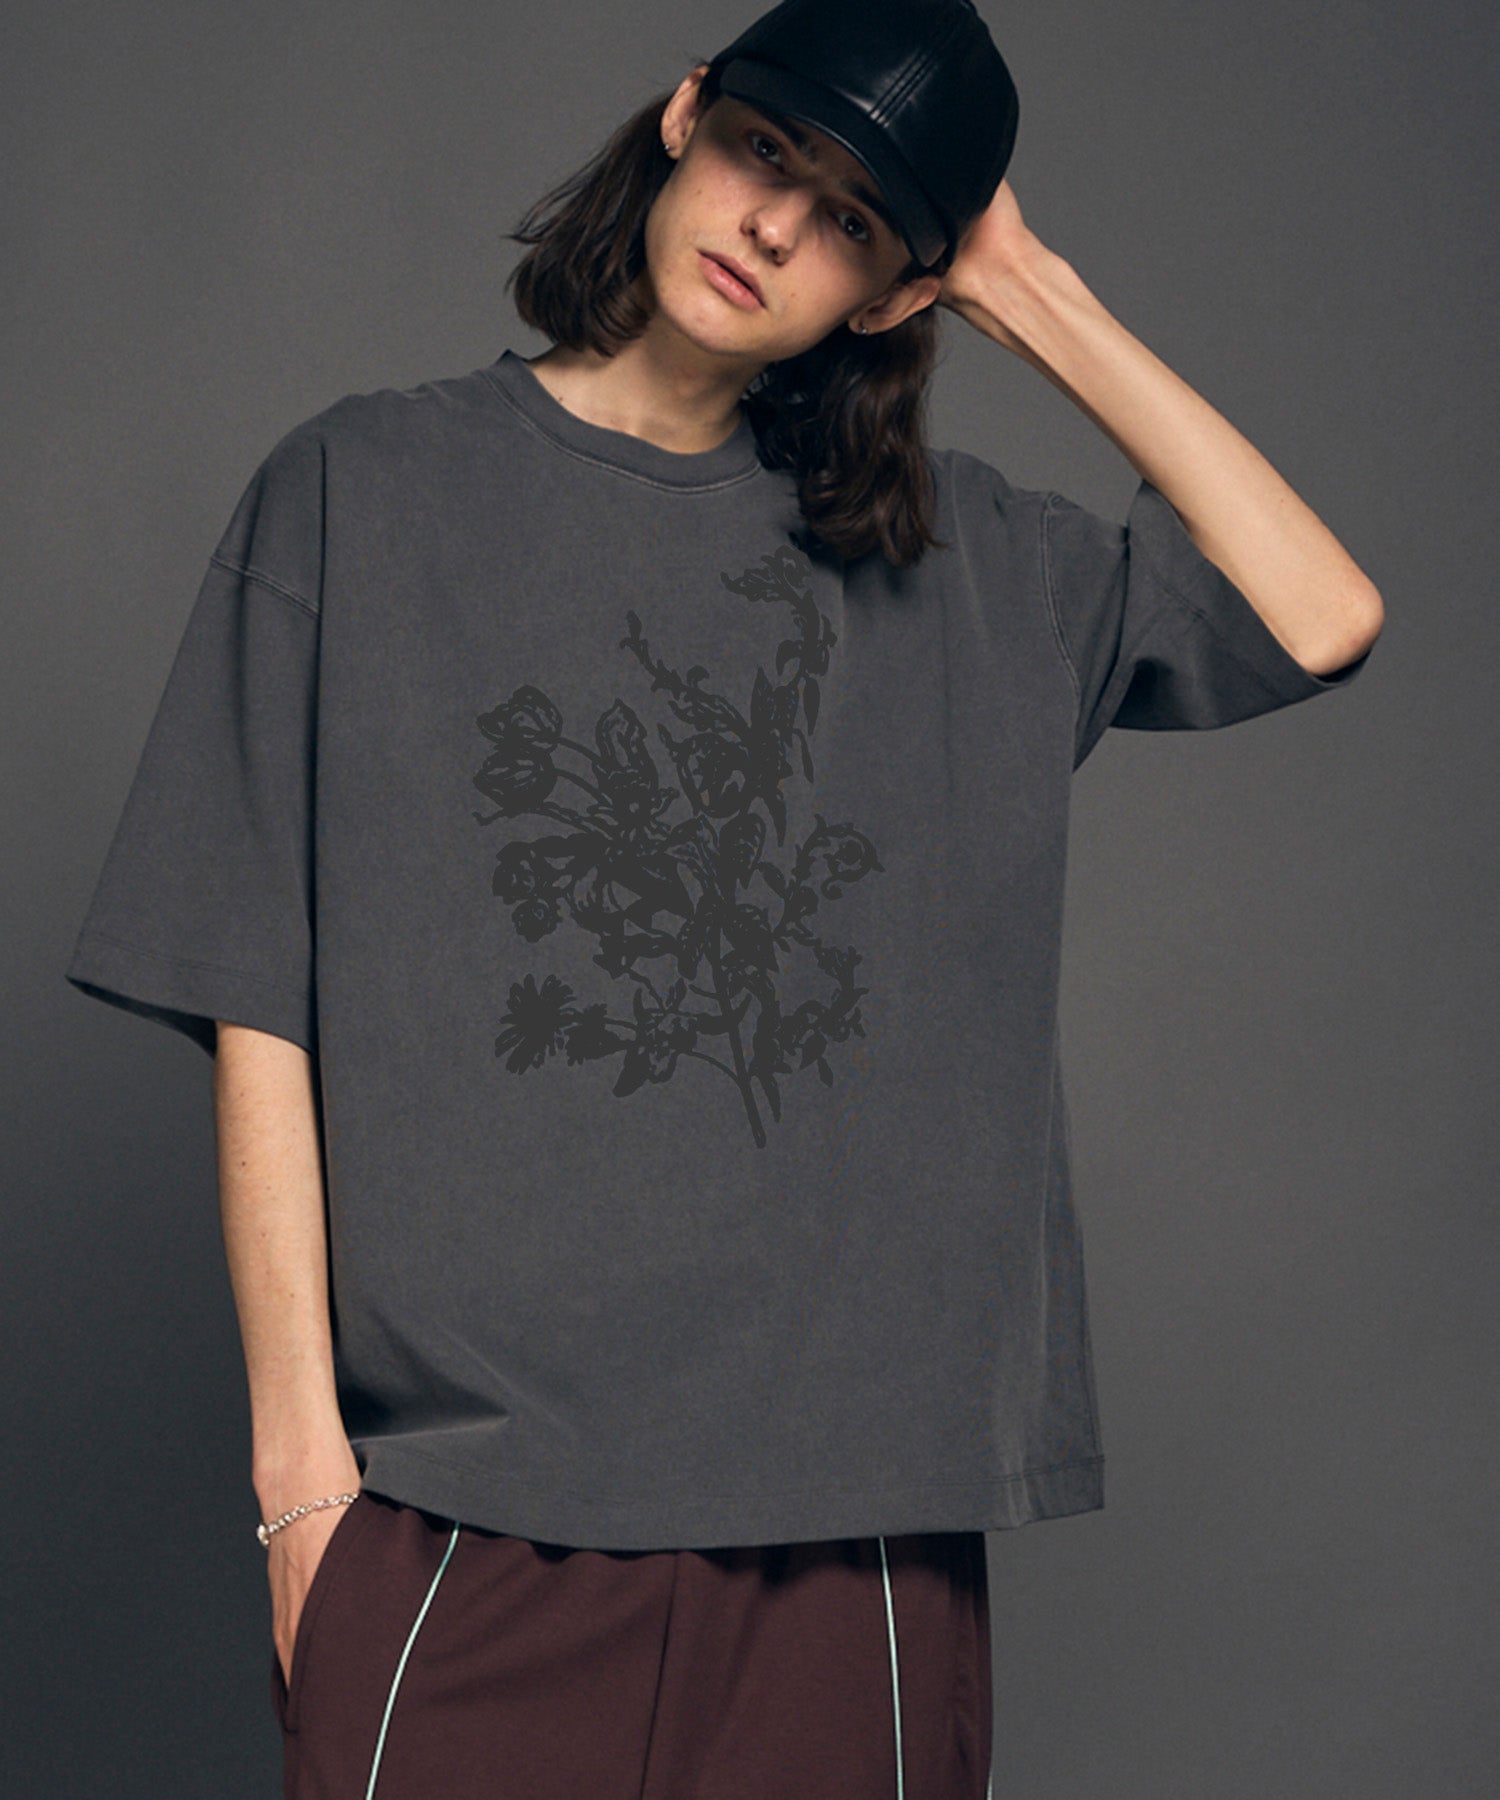 Flower Frocky Print Prime-Over Pigment Crew Neck T-Shirt